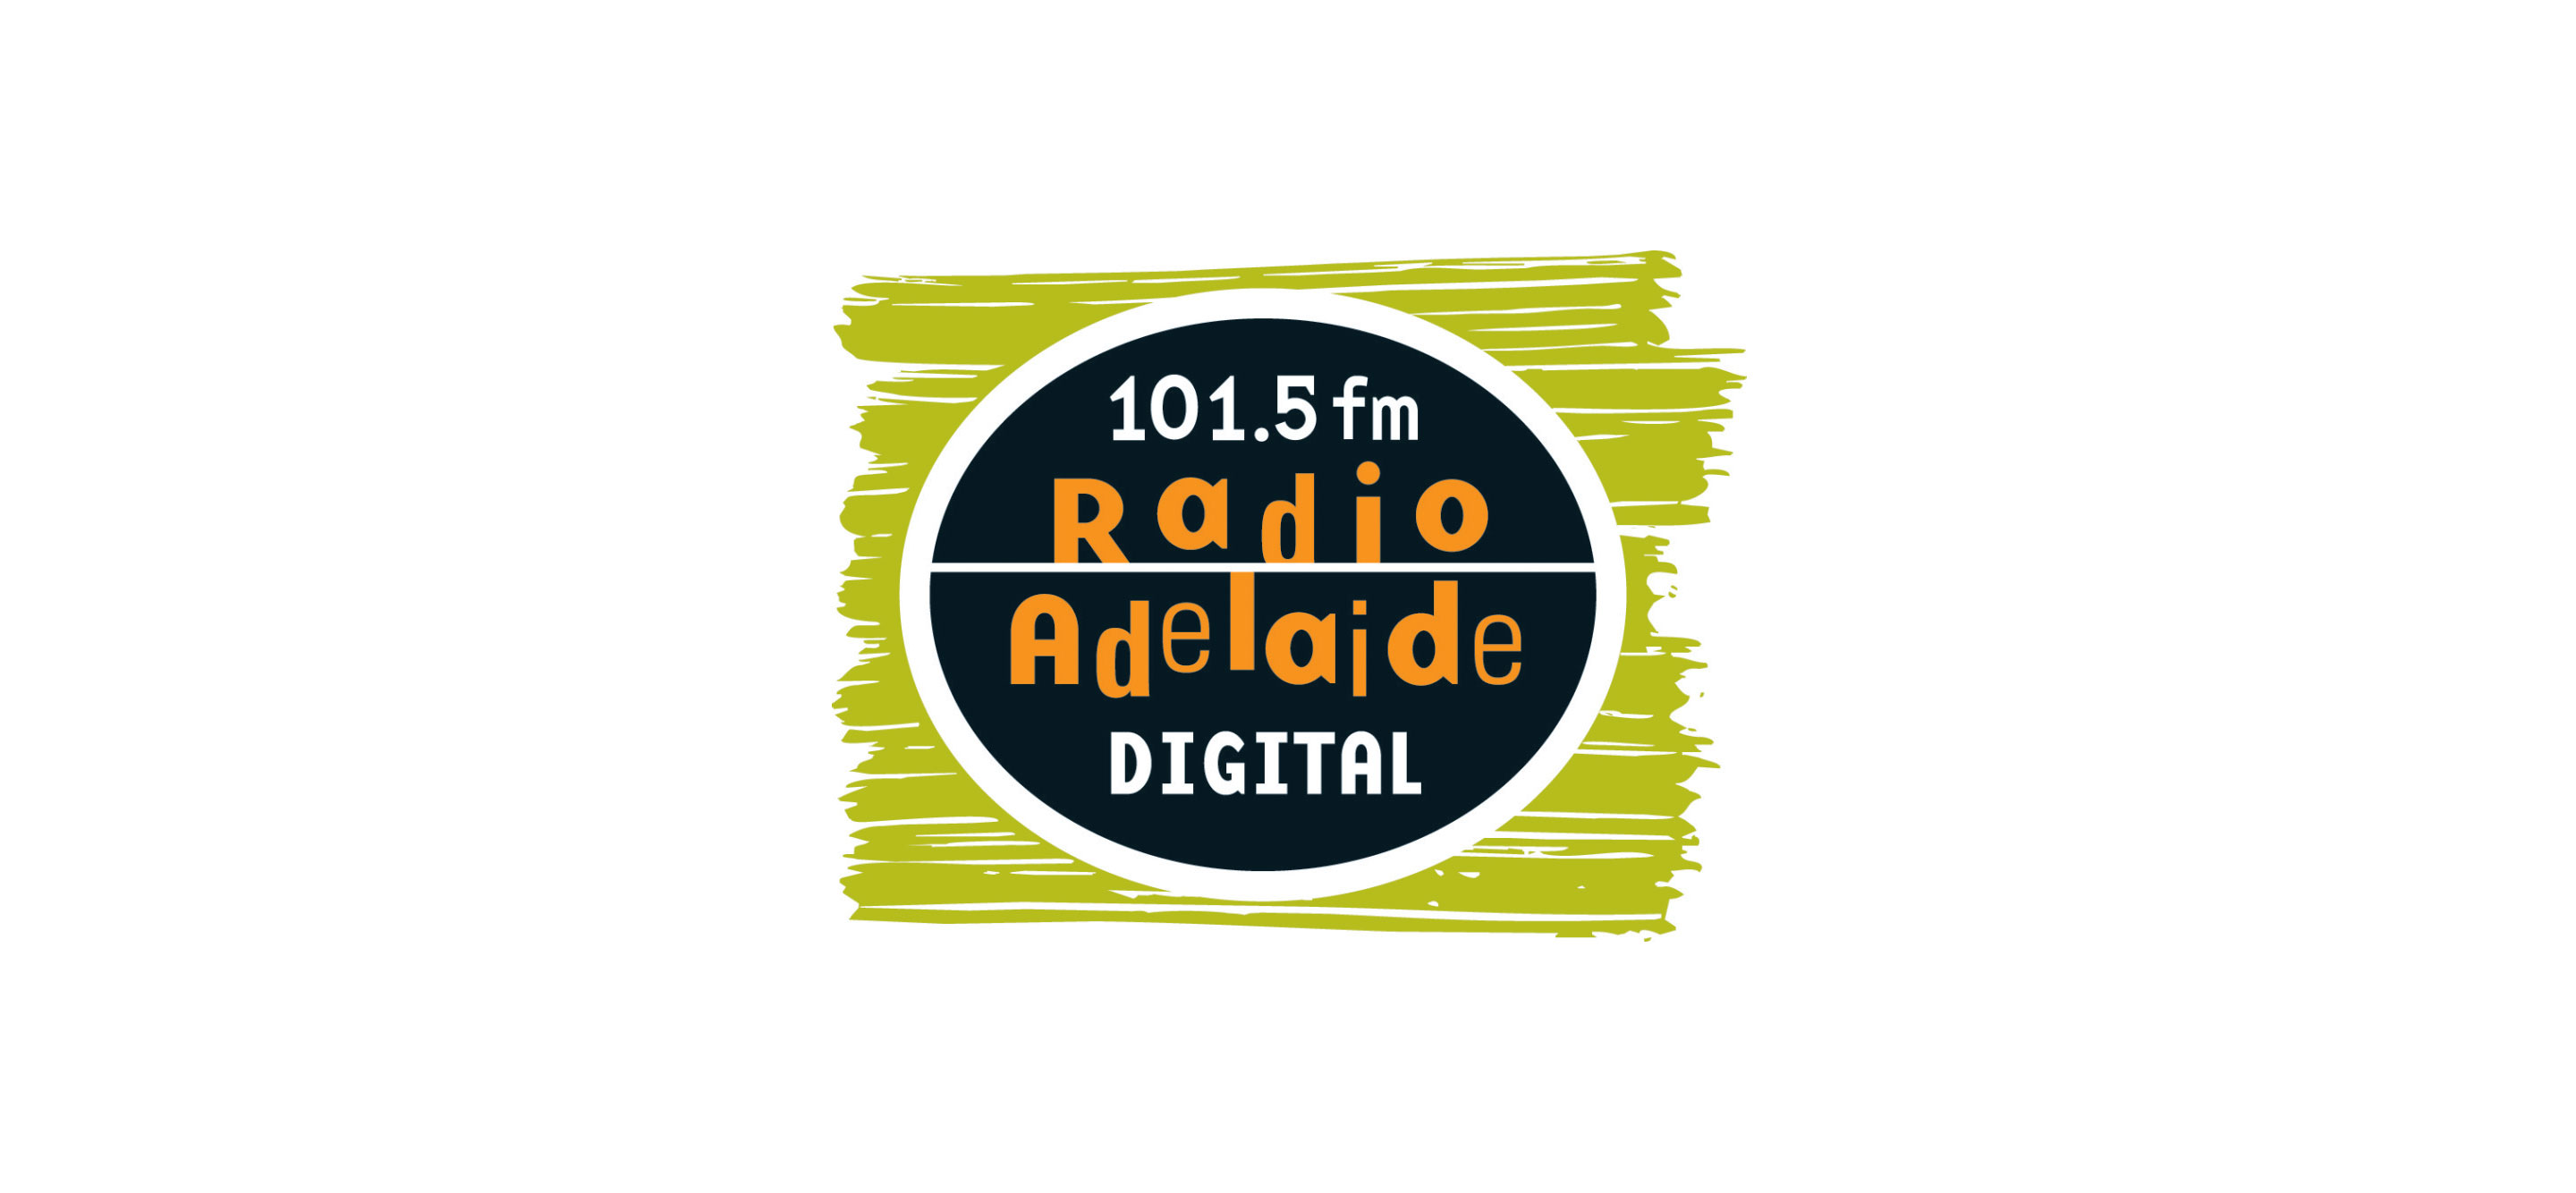 Future of Radio Adelaide up for discussion